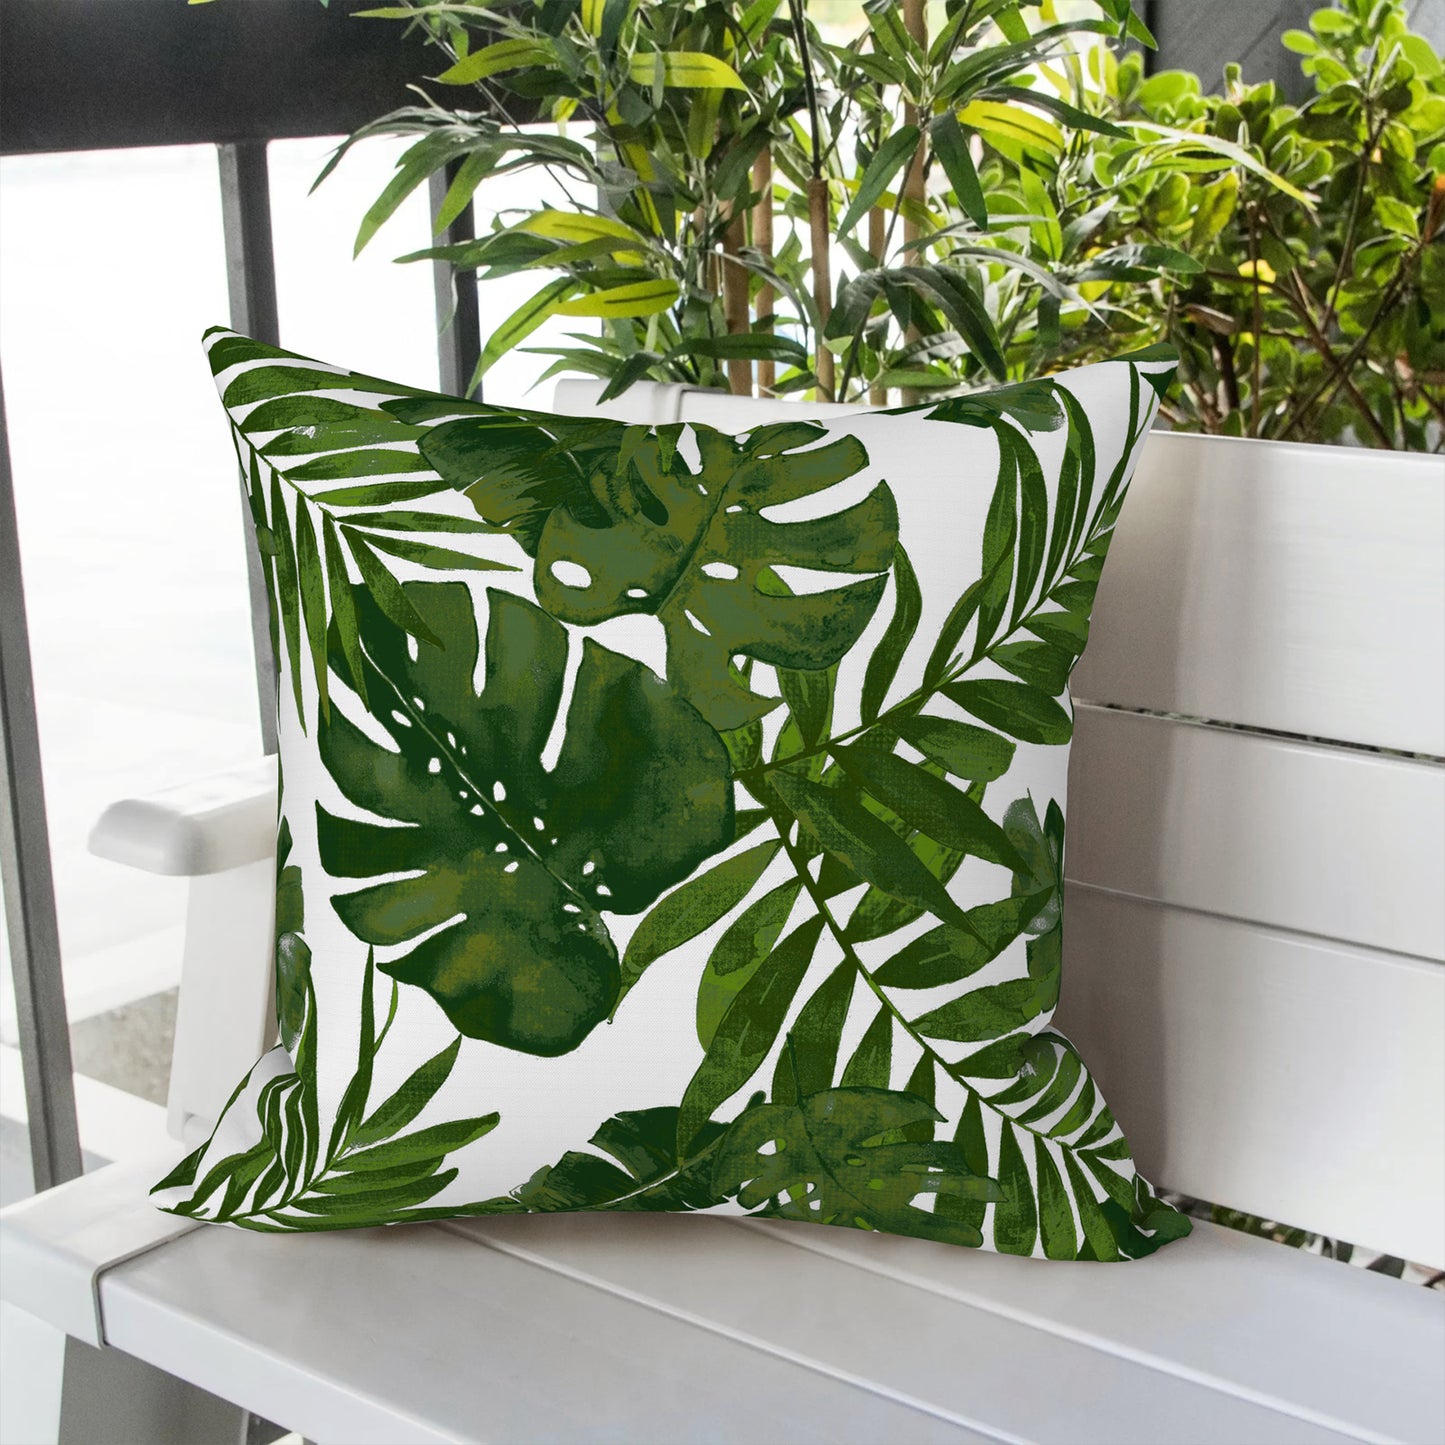 Melody Elephant Outdoor Throw Pillow Covers Pack of 2, Decorative Water Repellent Square Pillow Cases 18x18 Inch, Patio Pillowcases for Home Patio Furniture Use, Palm Green